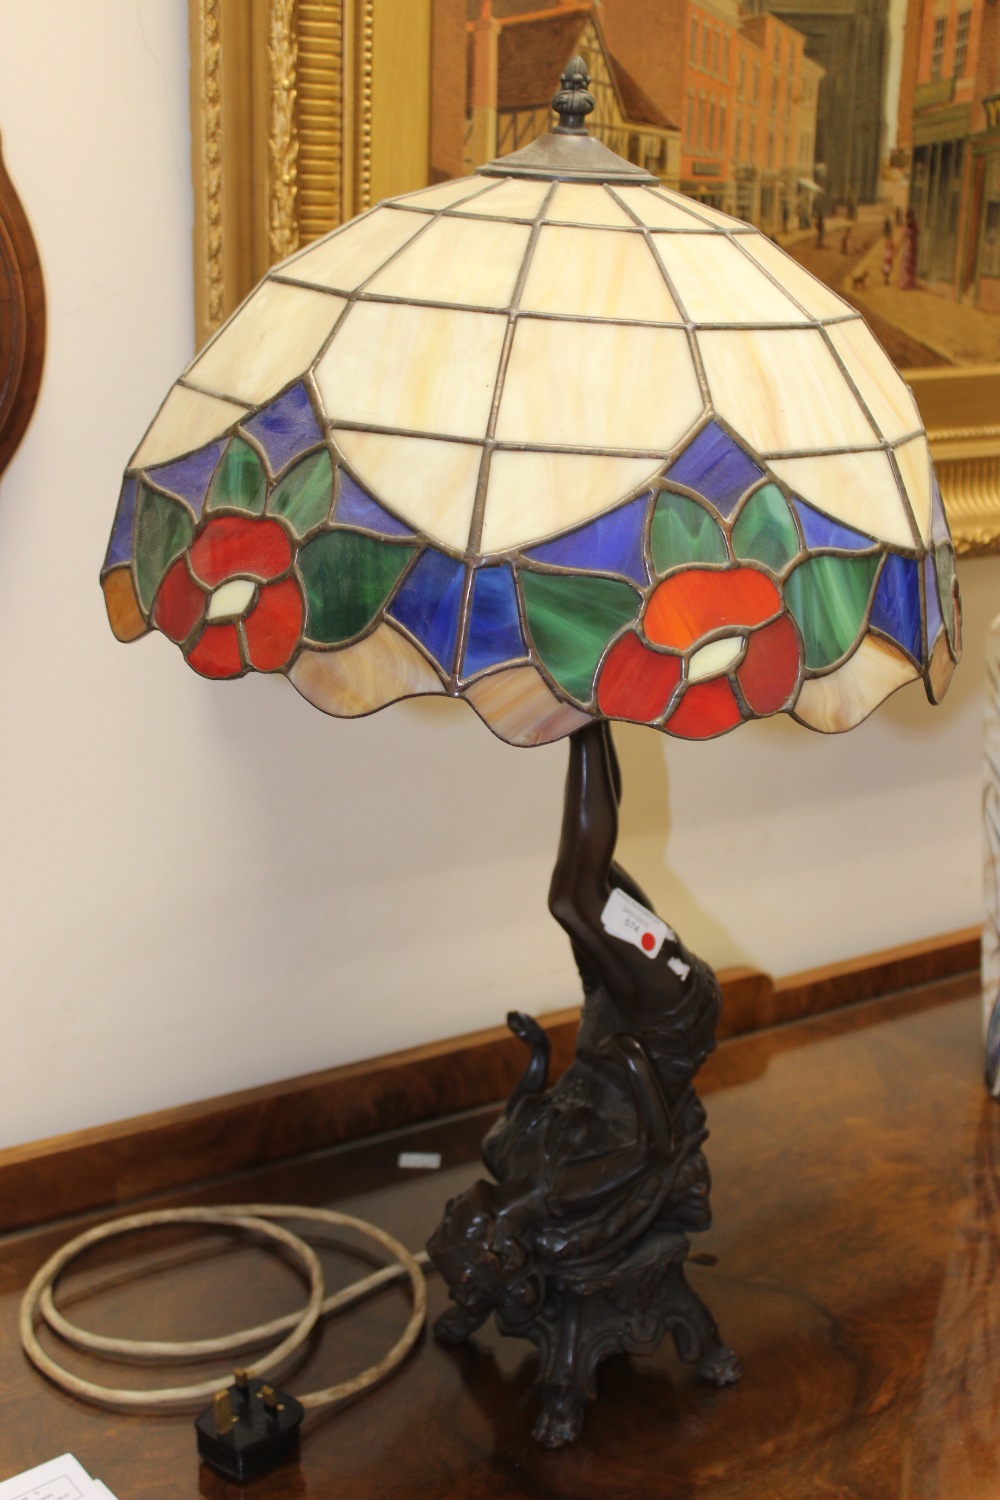 A Tiffany style table lamp, the stand being a lady holding up the shade and fittings